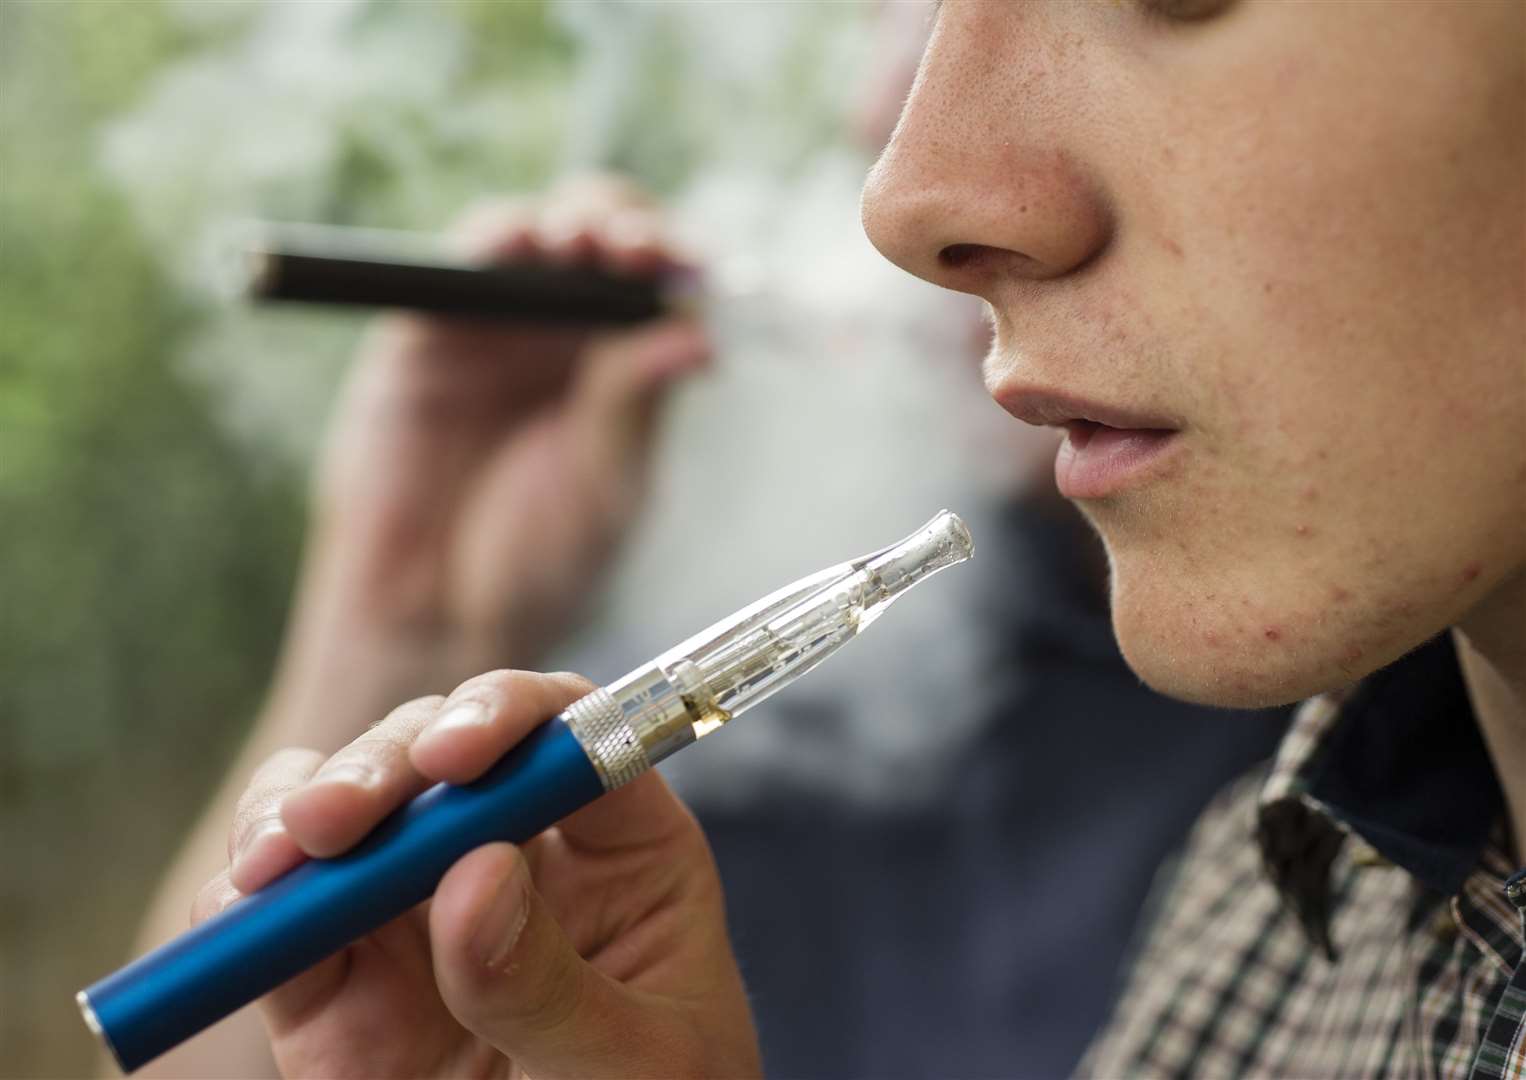 The long-term effects of vaping are still unknown